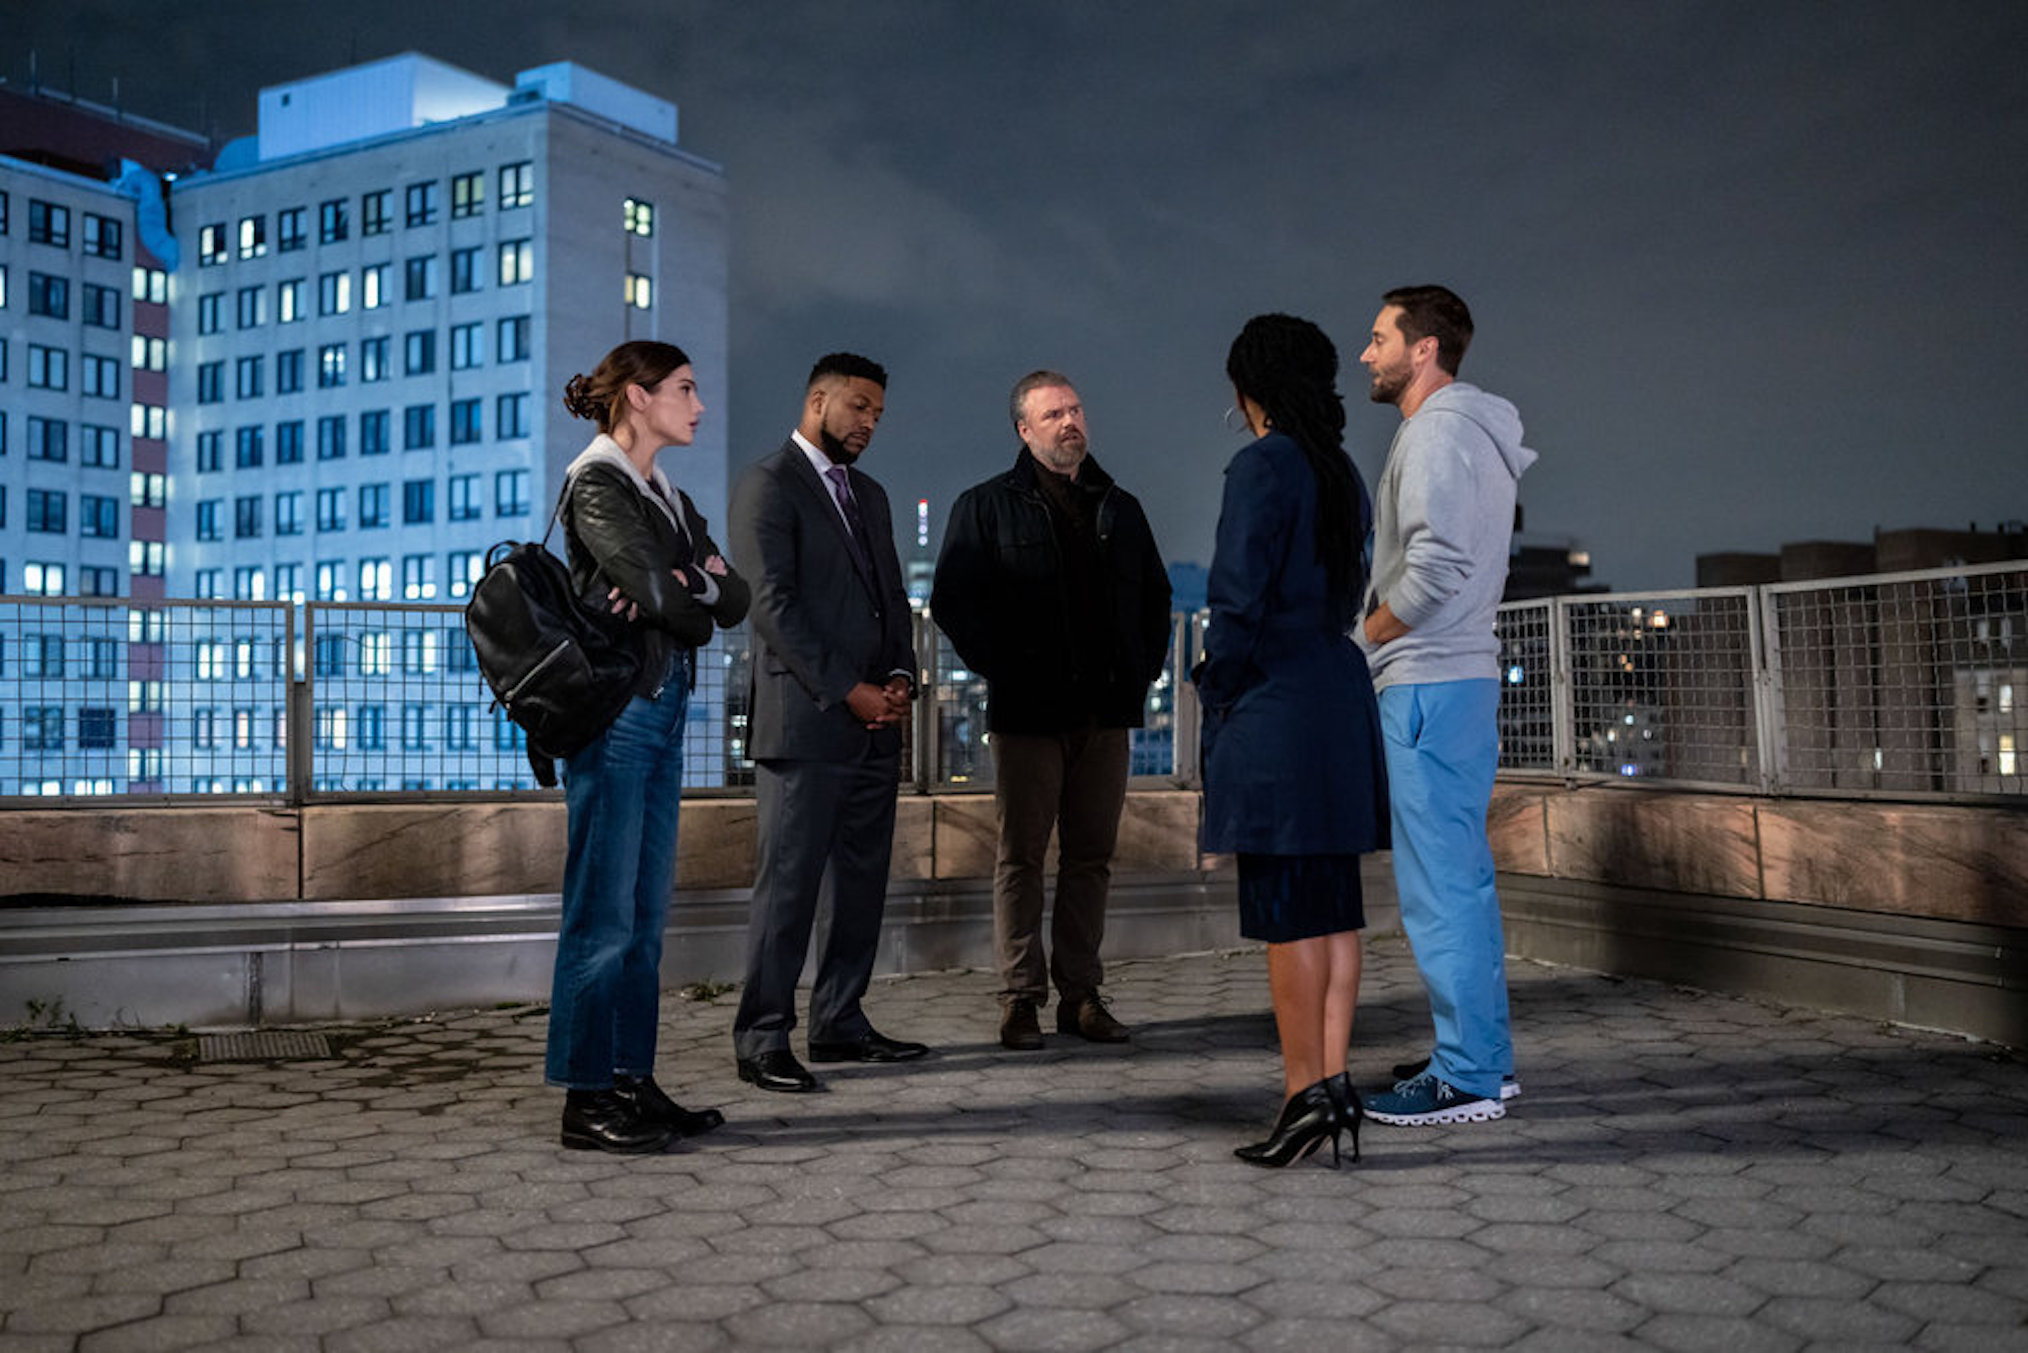 Janet Montgomery as Dr. Lauren Bloom, Jocko Sims as Dr. Floyd Reynolds, Tyler Labine as Dr. Iggy Frome, Ryan Eggold as Dr. Max Goodwin in New Amsterdam